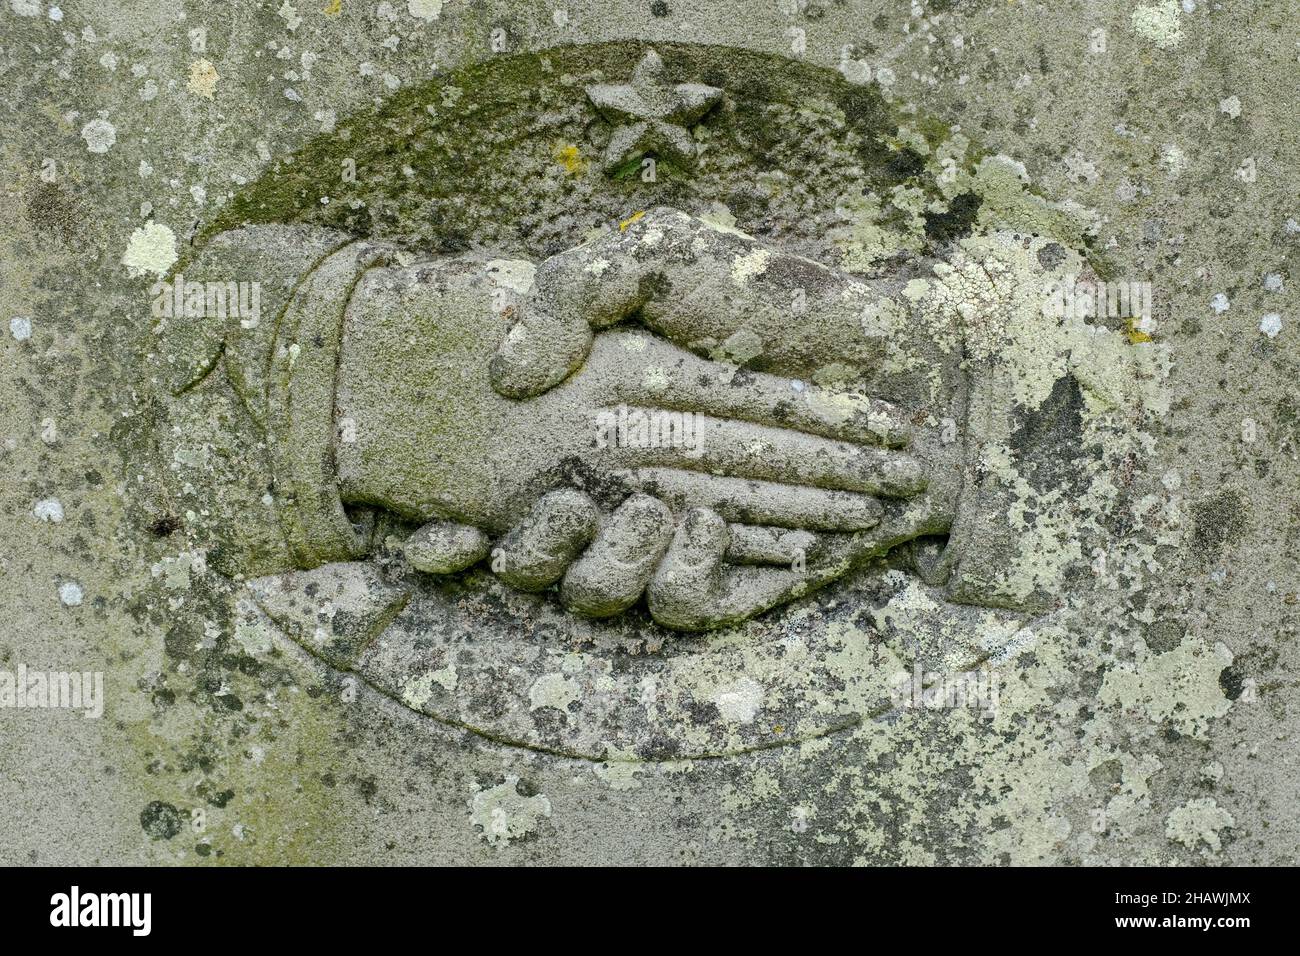 Shaking hands (male and female) carved into the stone on a 19th-century gravestone, St. Issui's Church, Partrishow, Powys, Wales Stock Photo